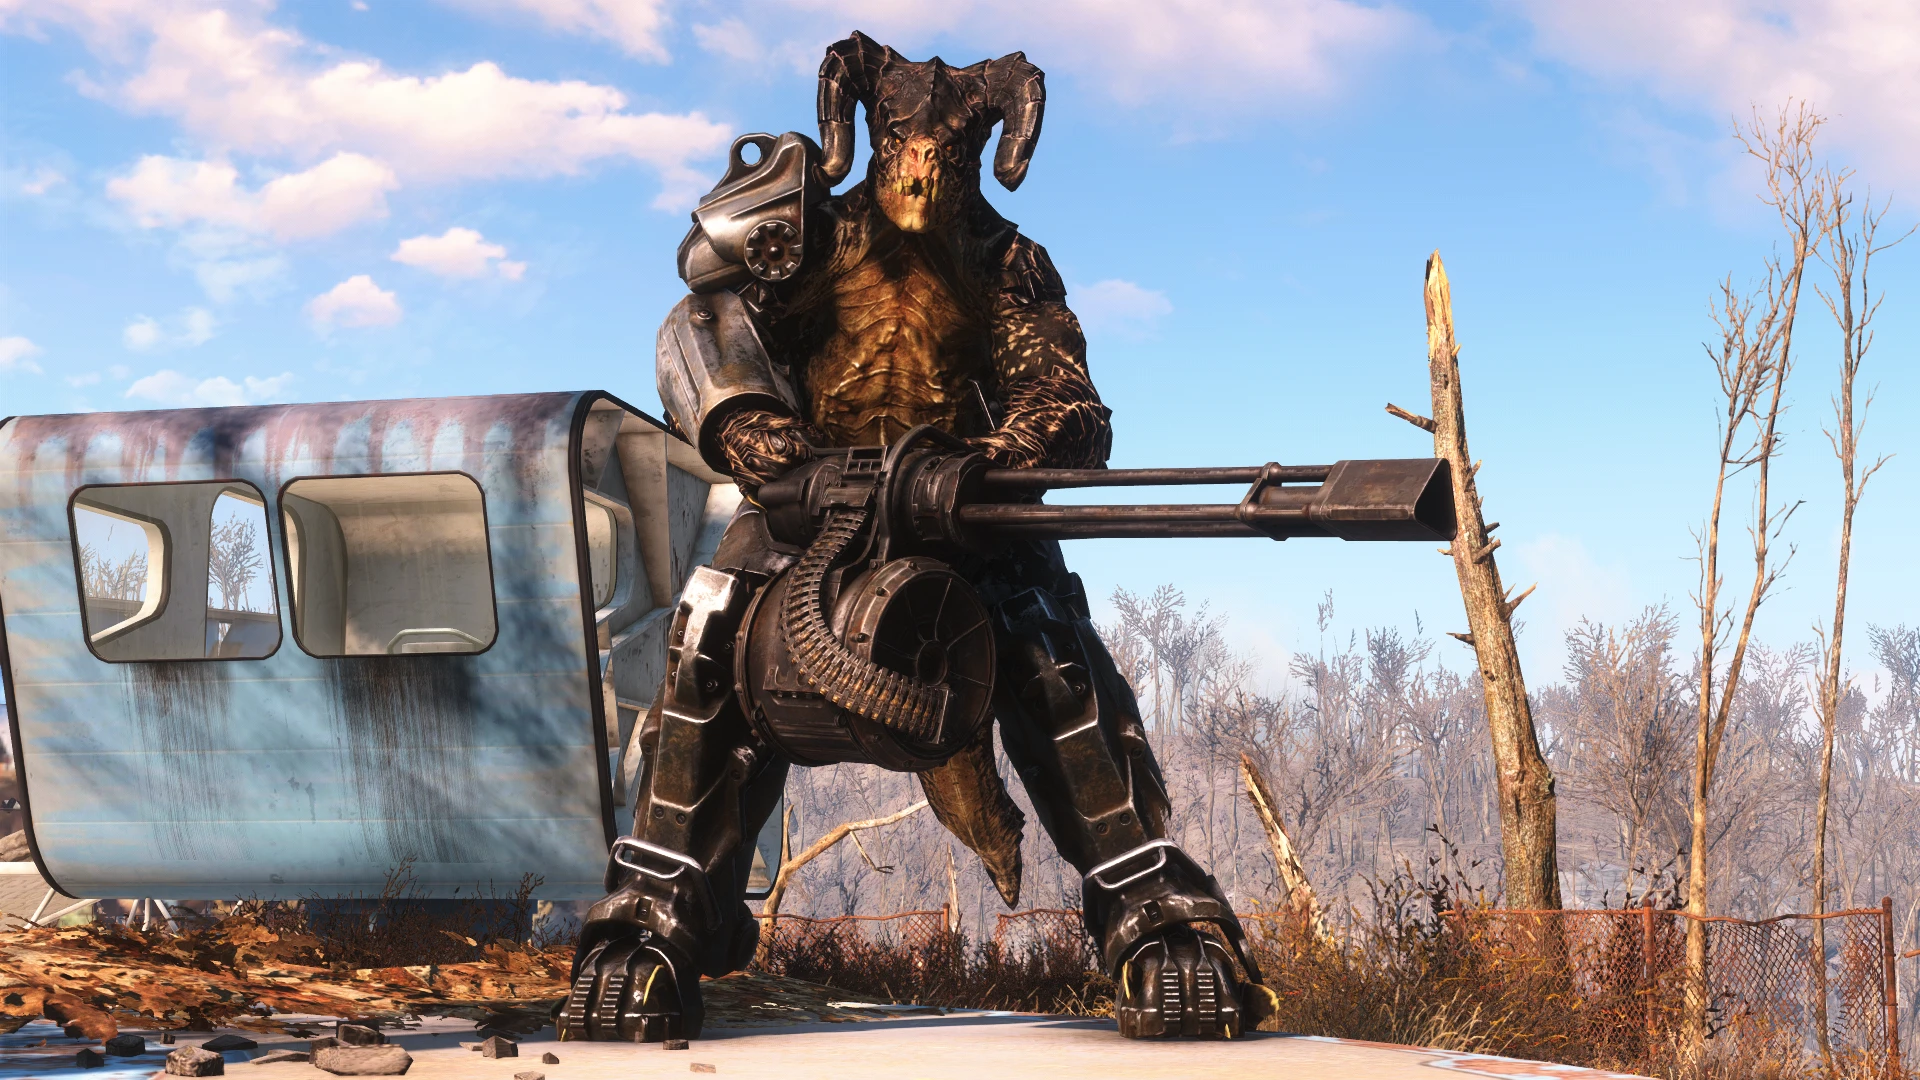 Power Deathclaw at Fallout 4 Nexus - Mods and community